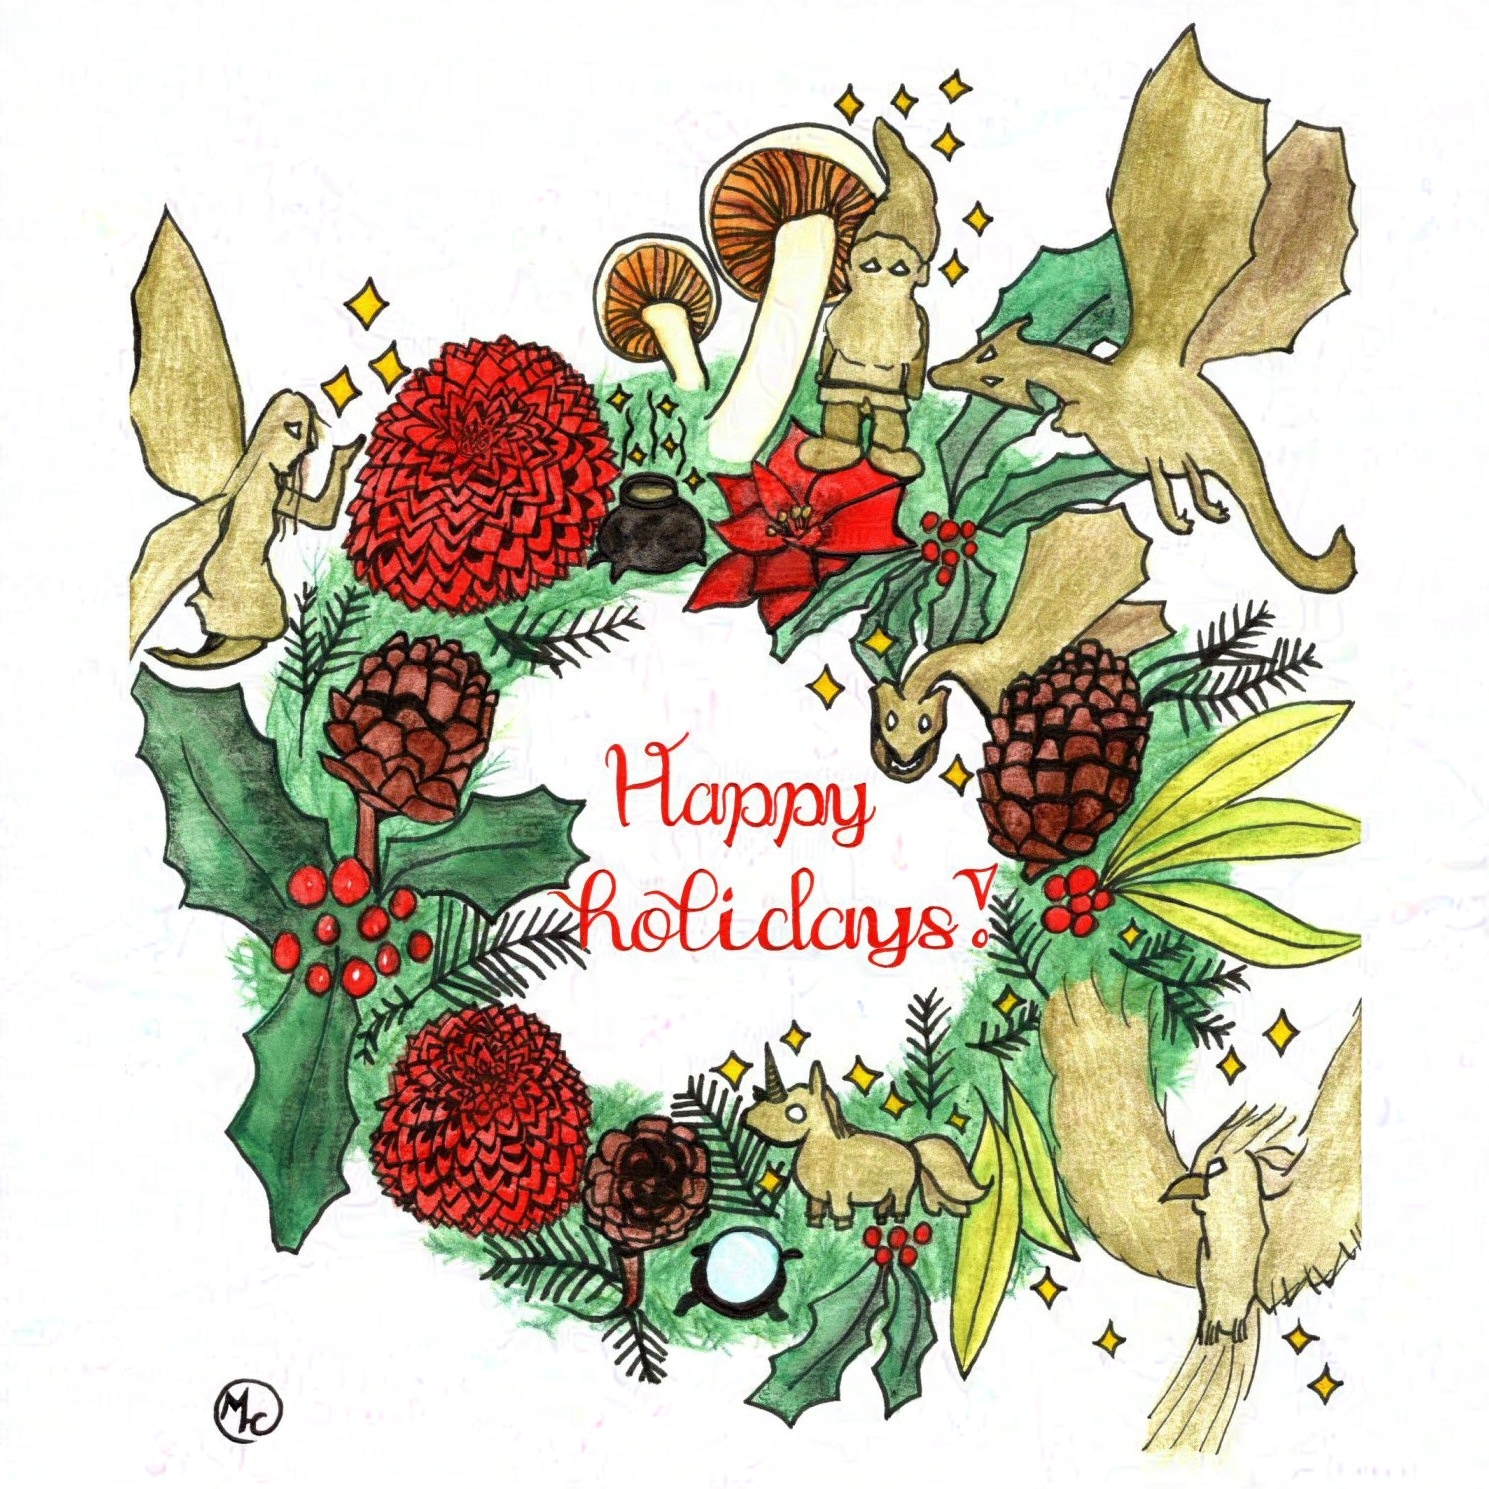 Handdrawn holiday card with a magical Christmas wreath